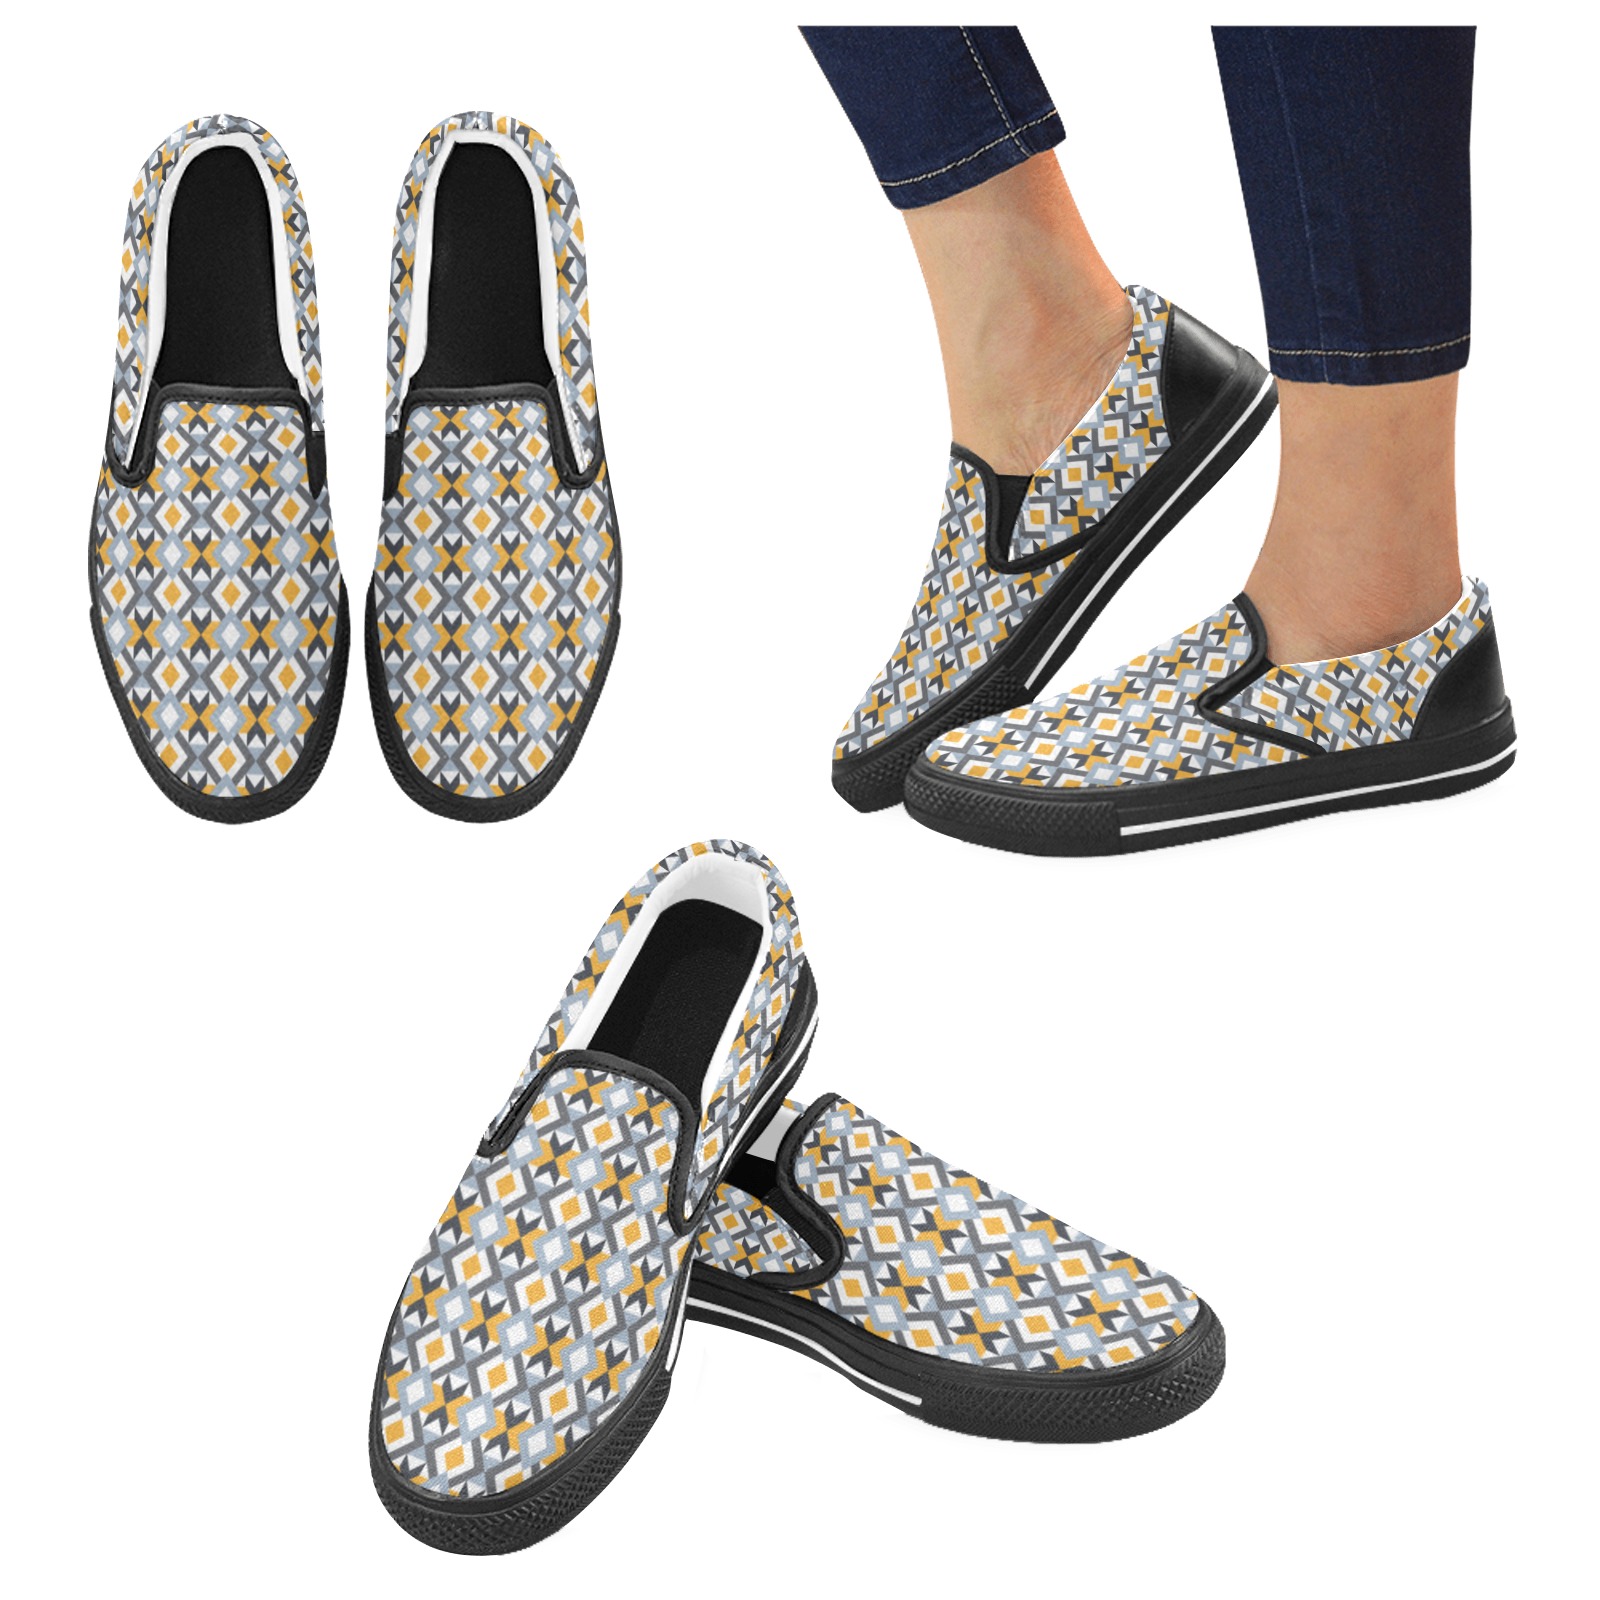 Retro Angles Abstract Geometric Pattern Men's Slip-on Canvas Shoes (Model 019)